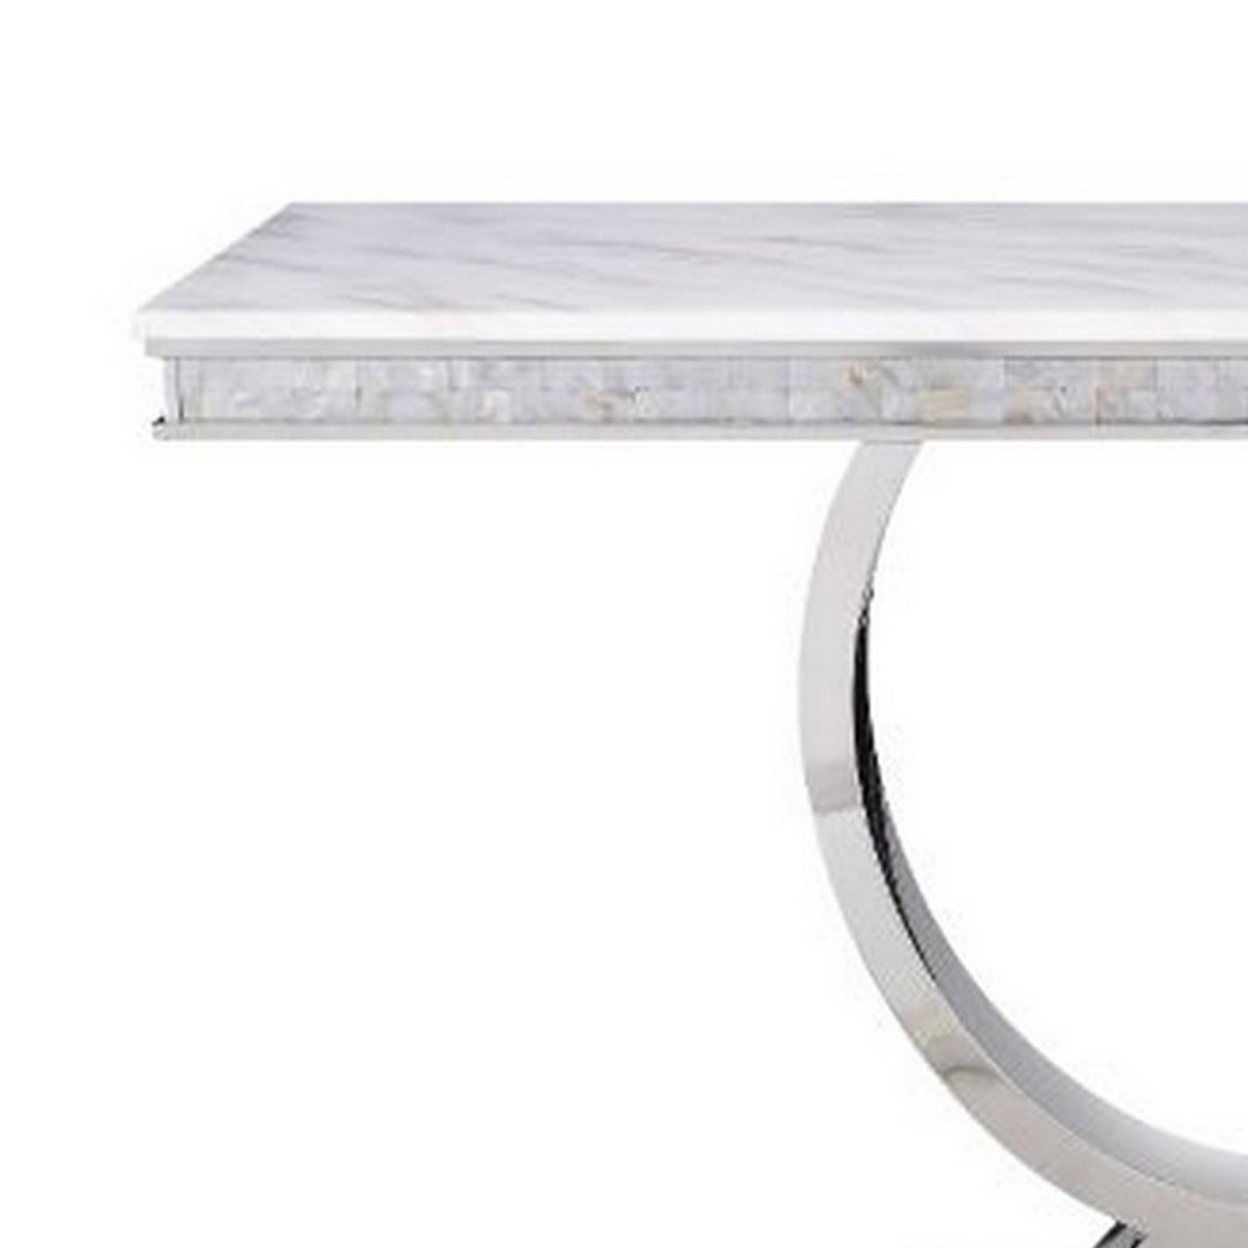 End Table With Faux Marble Top And Steel Base, White And Silver- Saltoro Sherpi